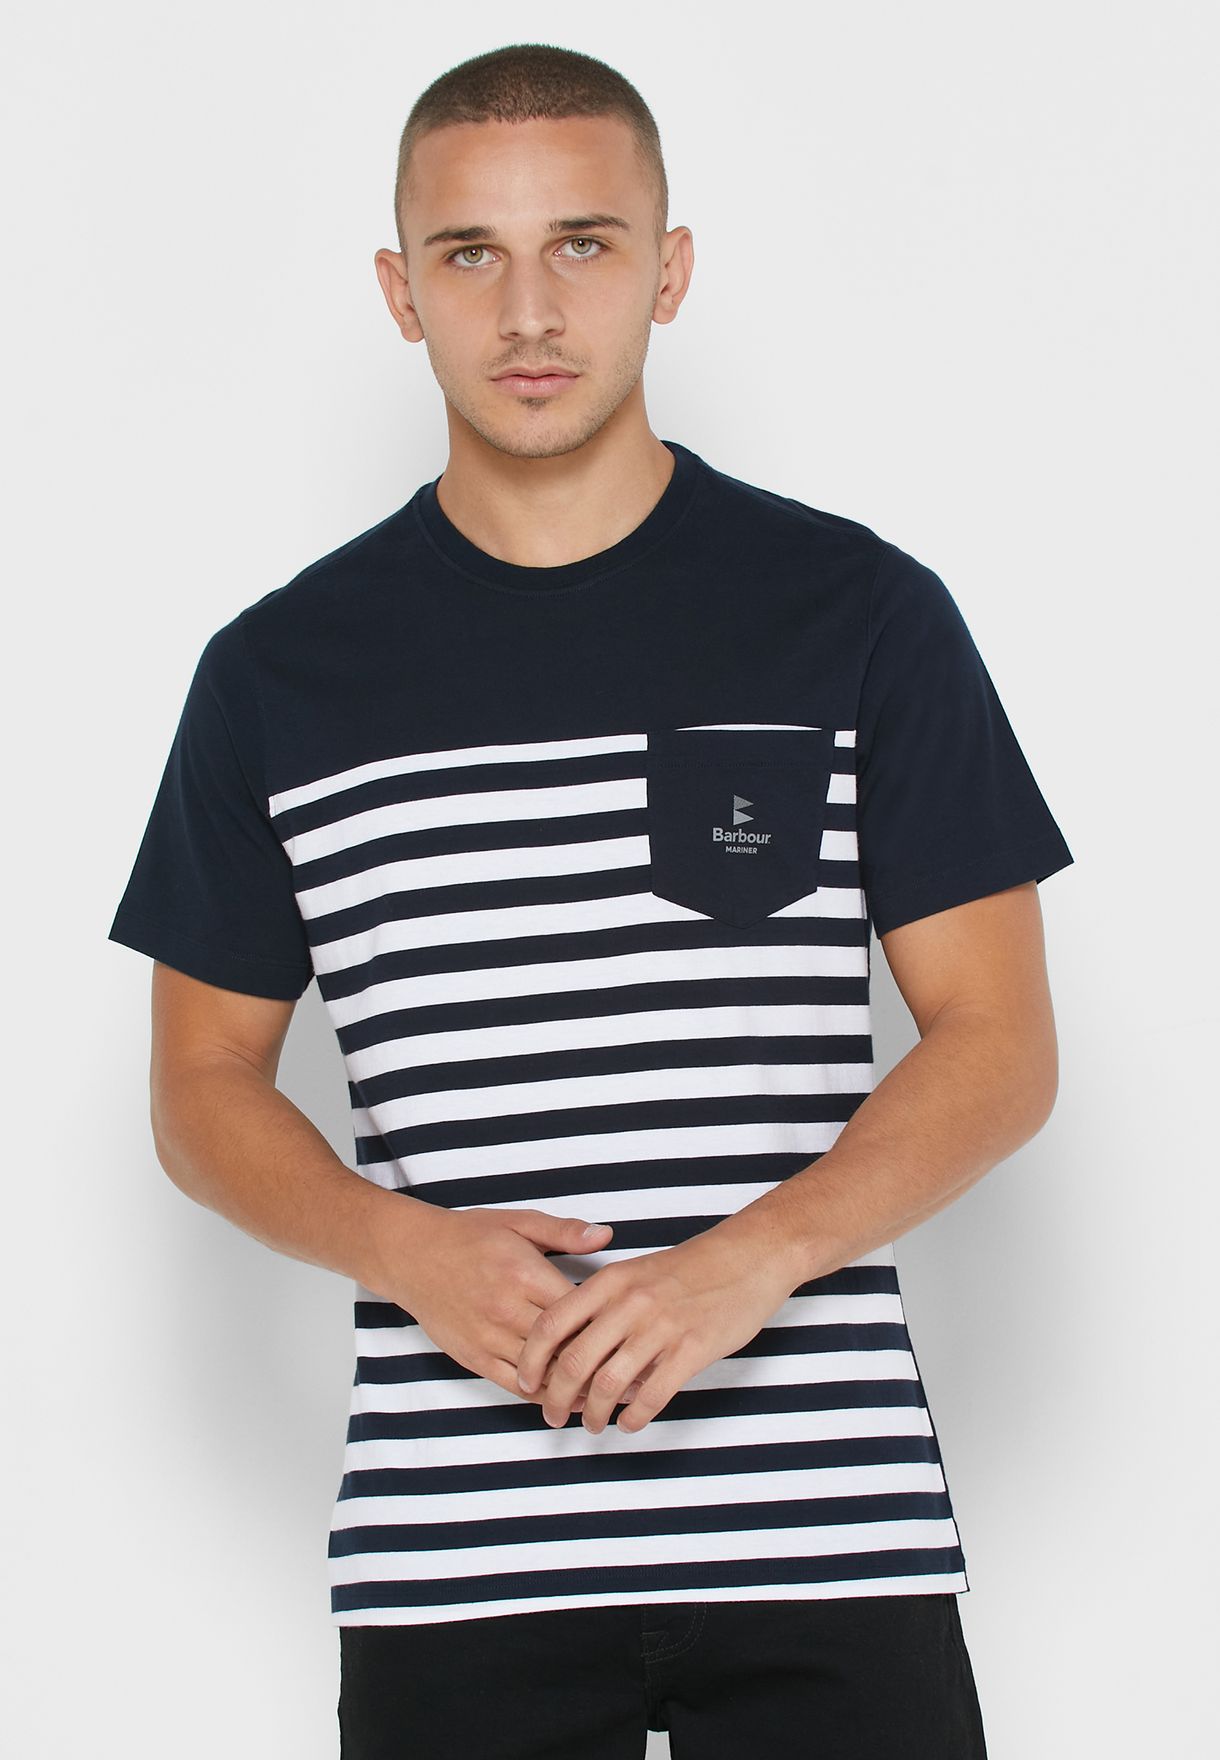 barbour striped t shirt